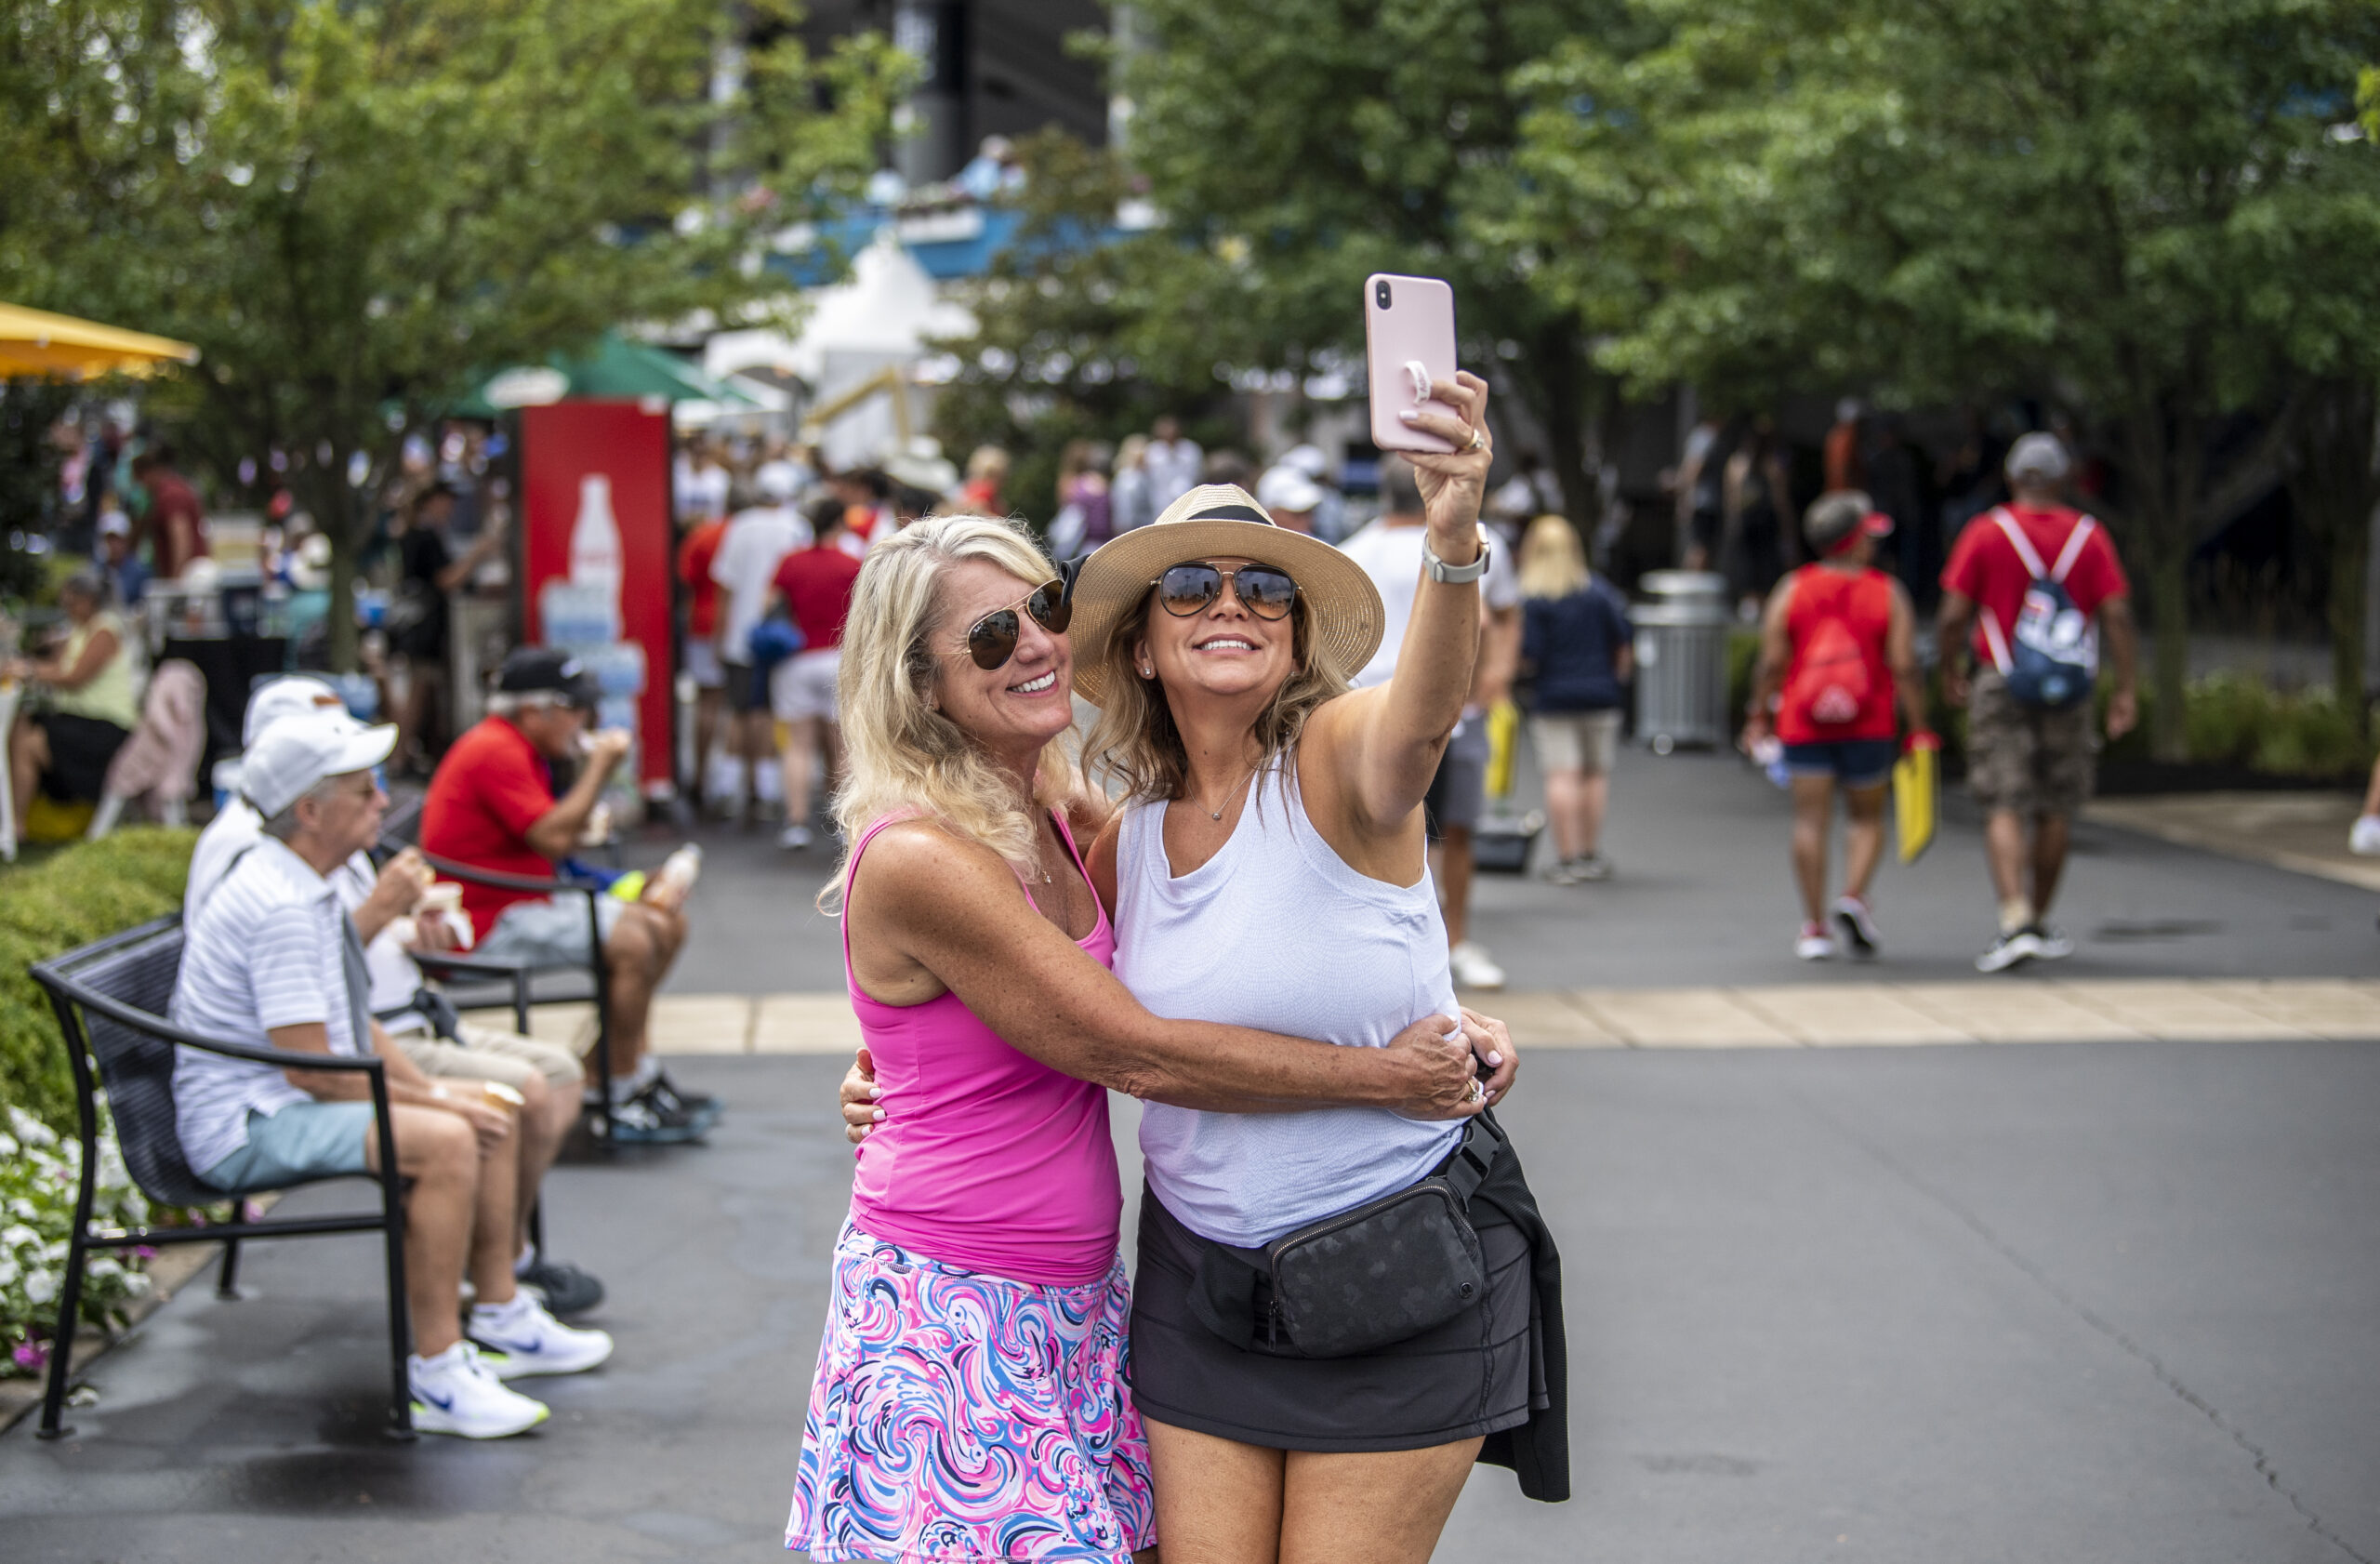 Two women taking a selfie on the grounds of the Western & Southern Open